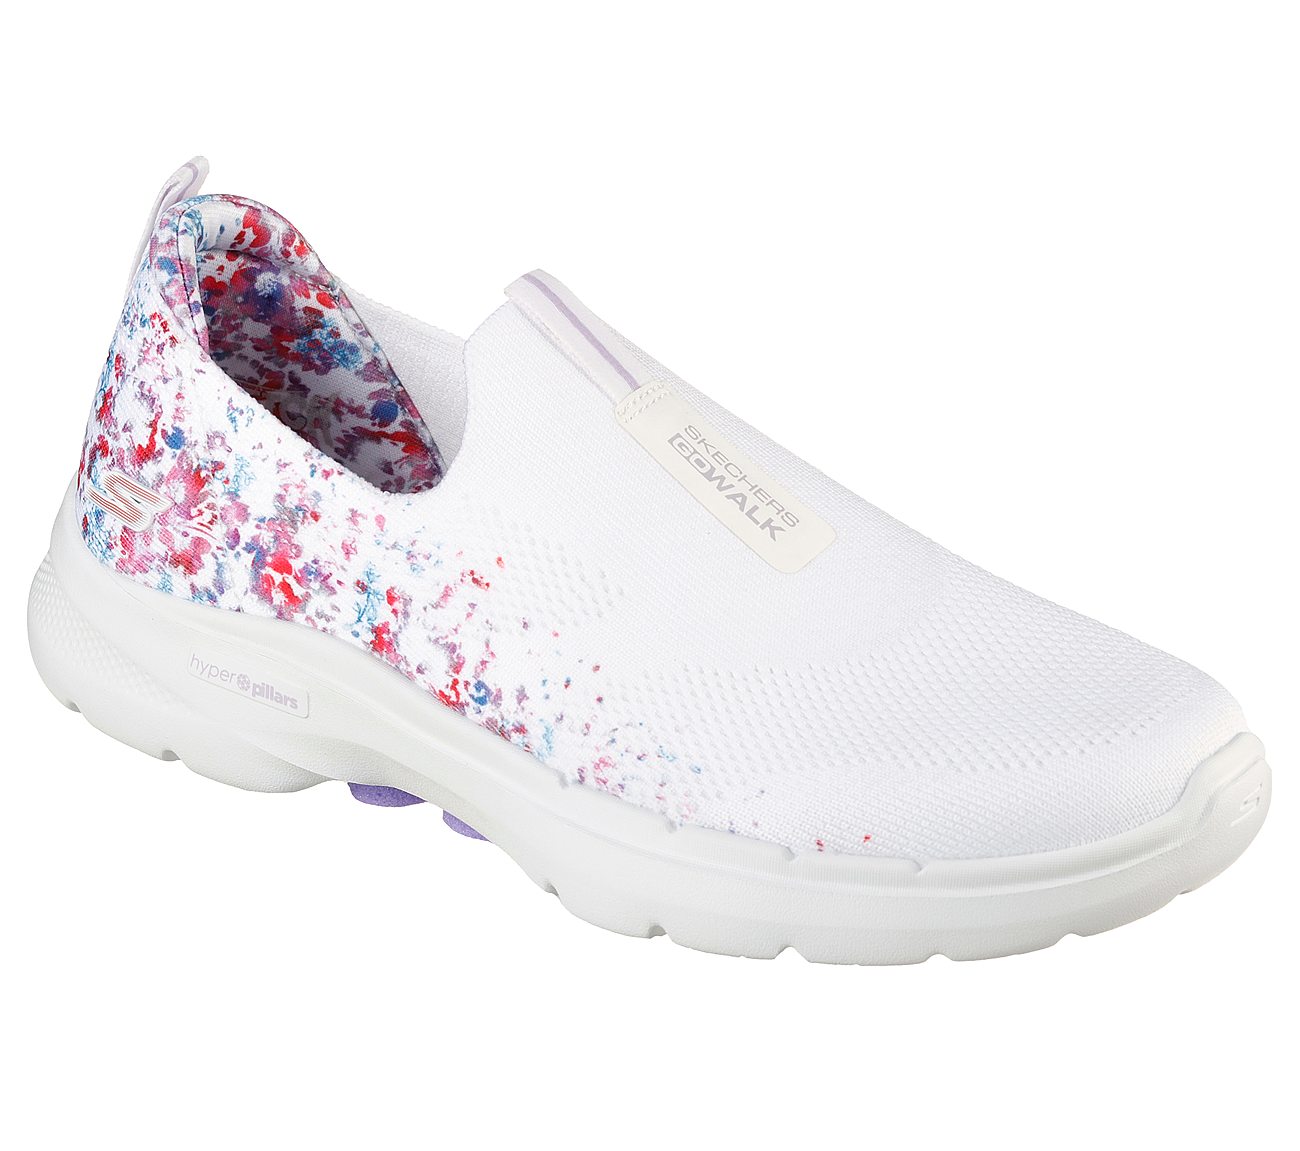 GO WALK 6 - FLORAL SUNRISE, WHITE/MULTI Footwear Lateral View